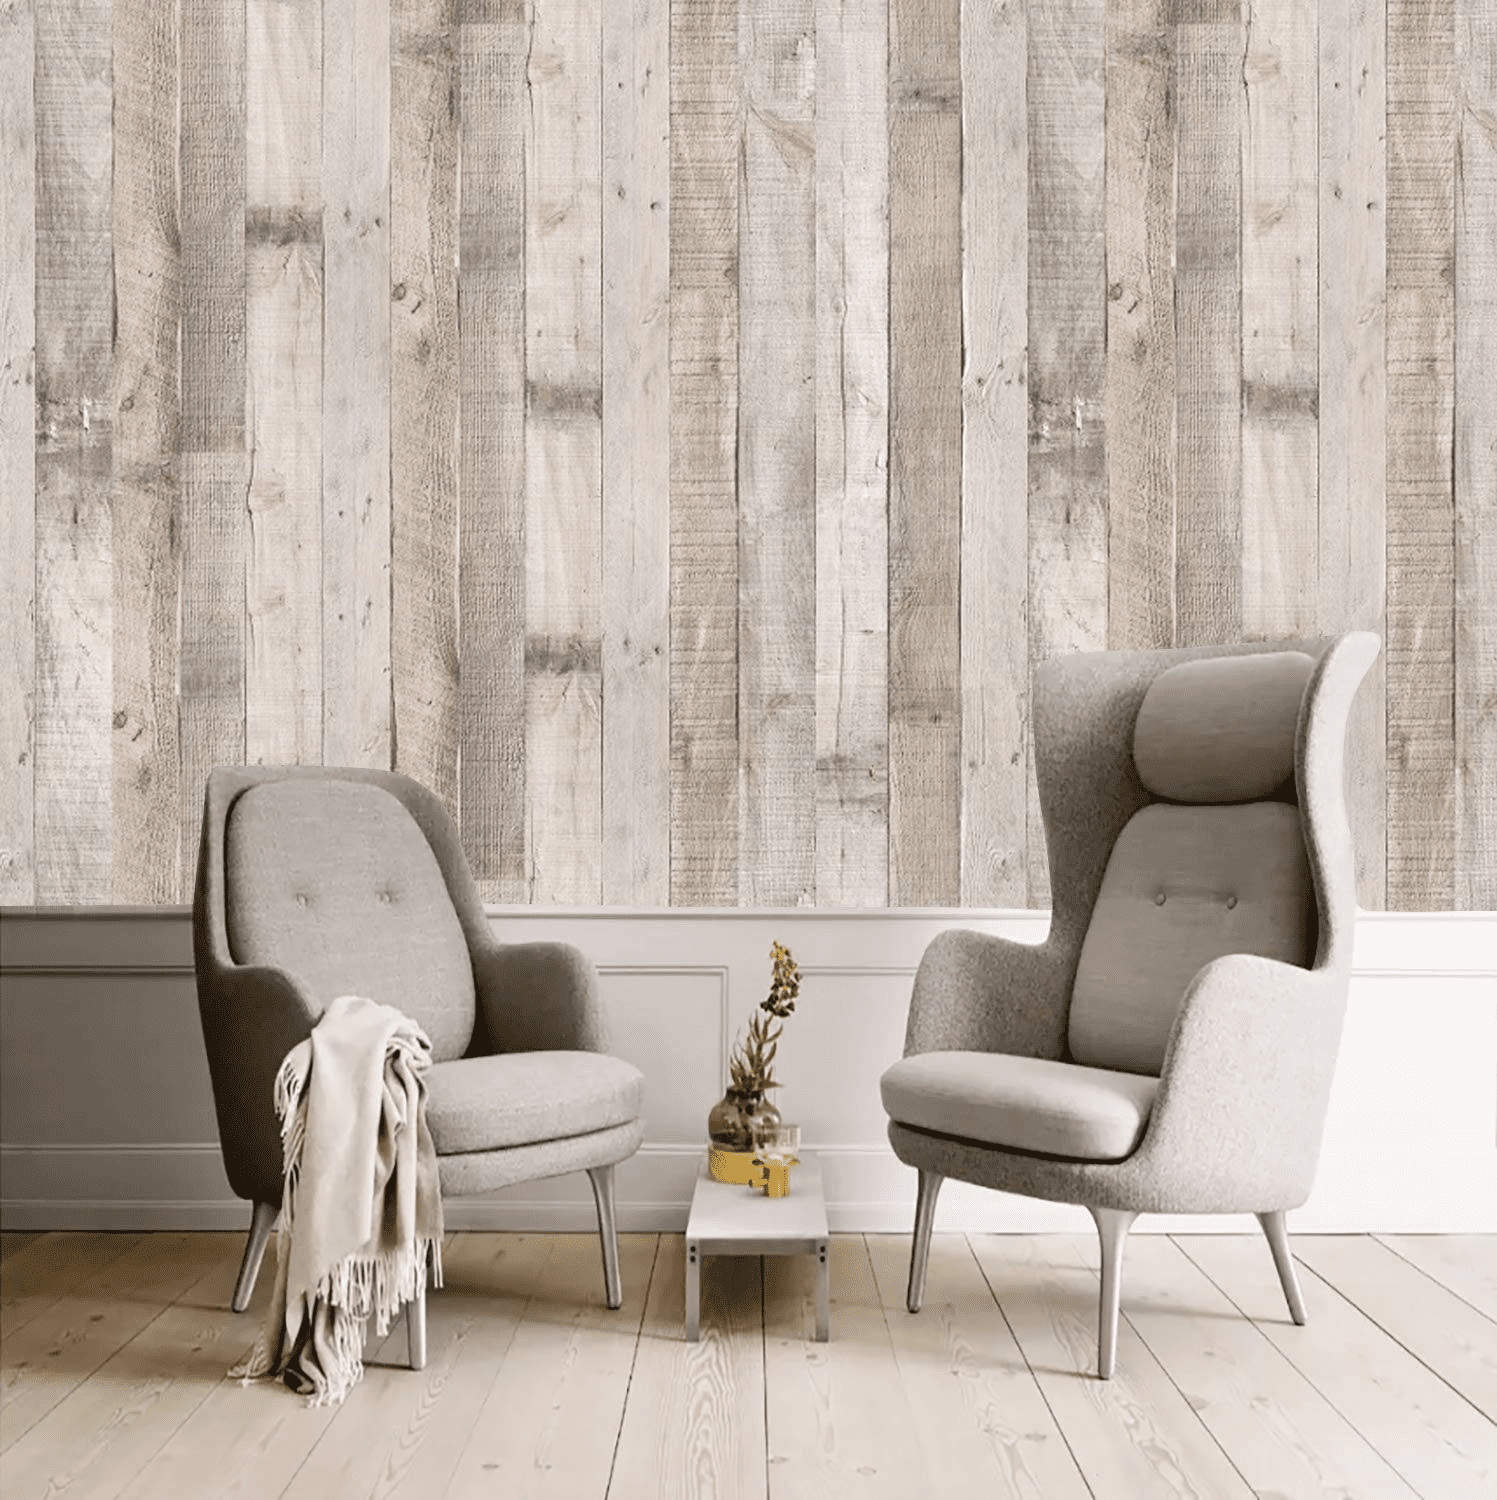 Art3d Peel and Stick Wallpaper 197 x 24 Wood Wall Paper Self-Adhesive  Contact Paper